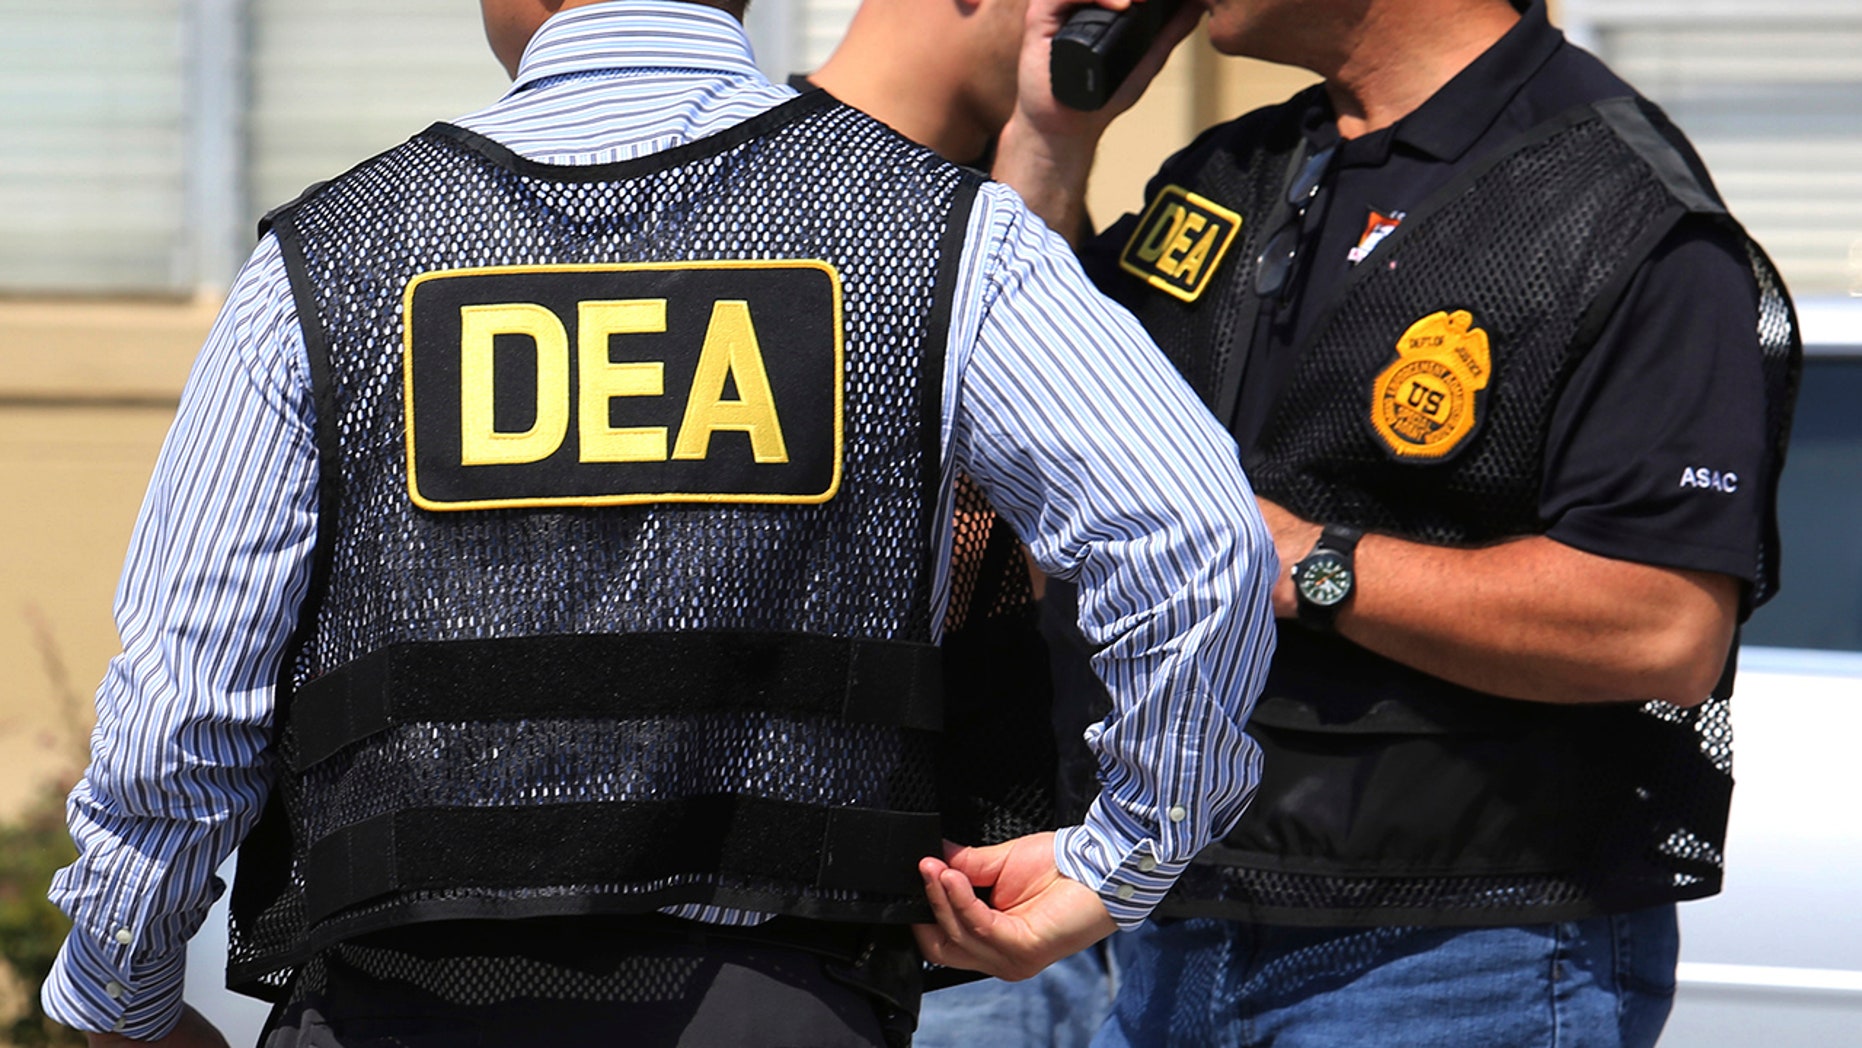 Veteran Star Dea Agent Conspired With Colombia Drug Cartels To